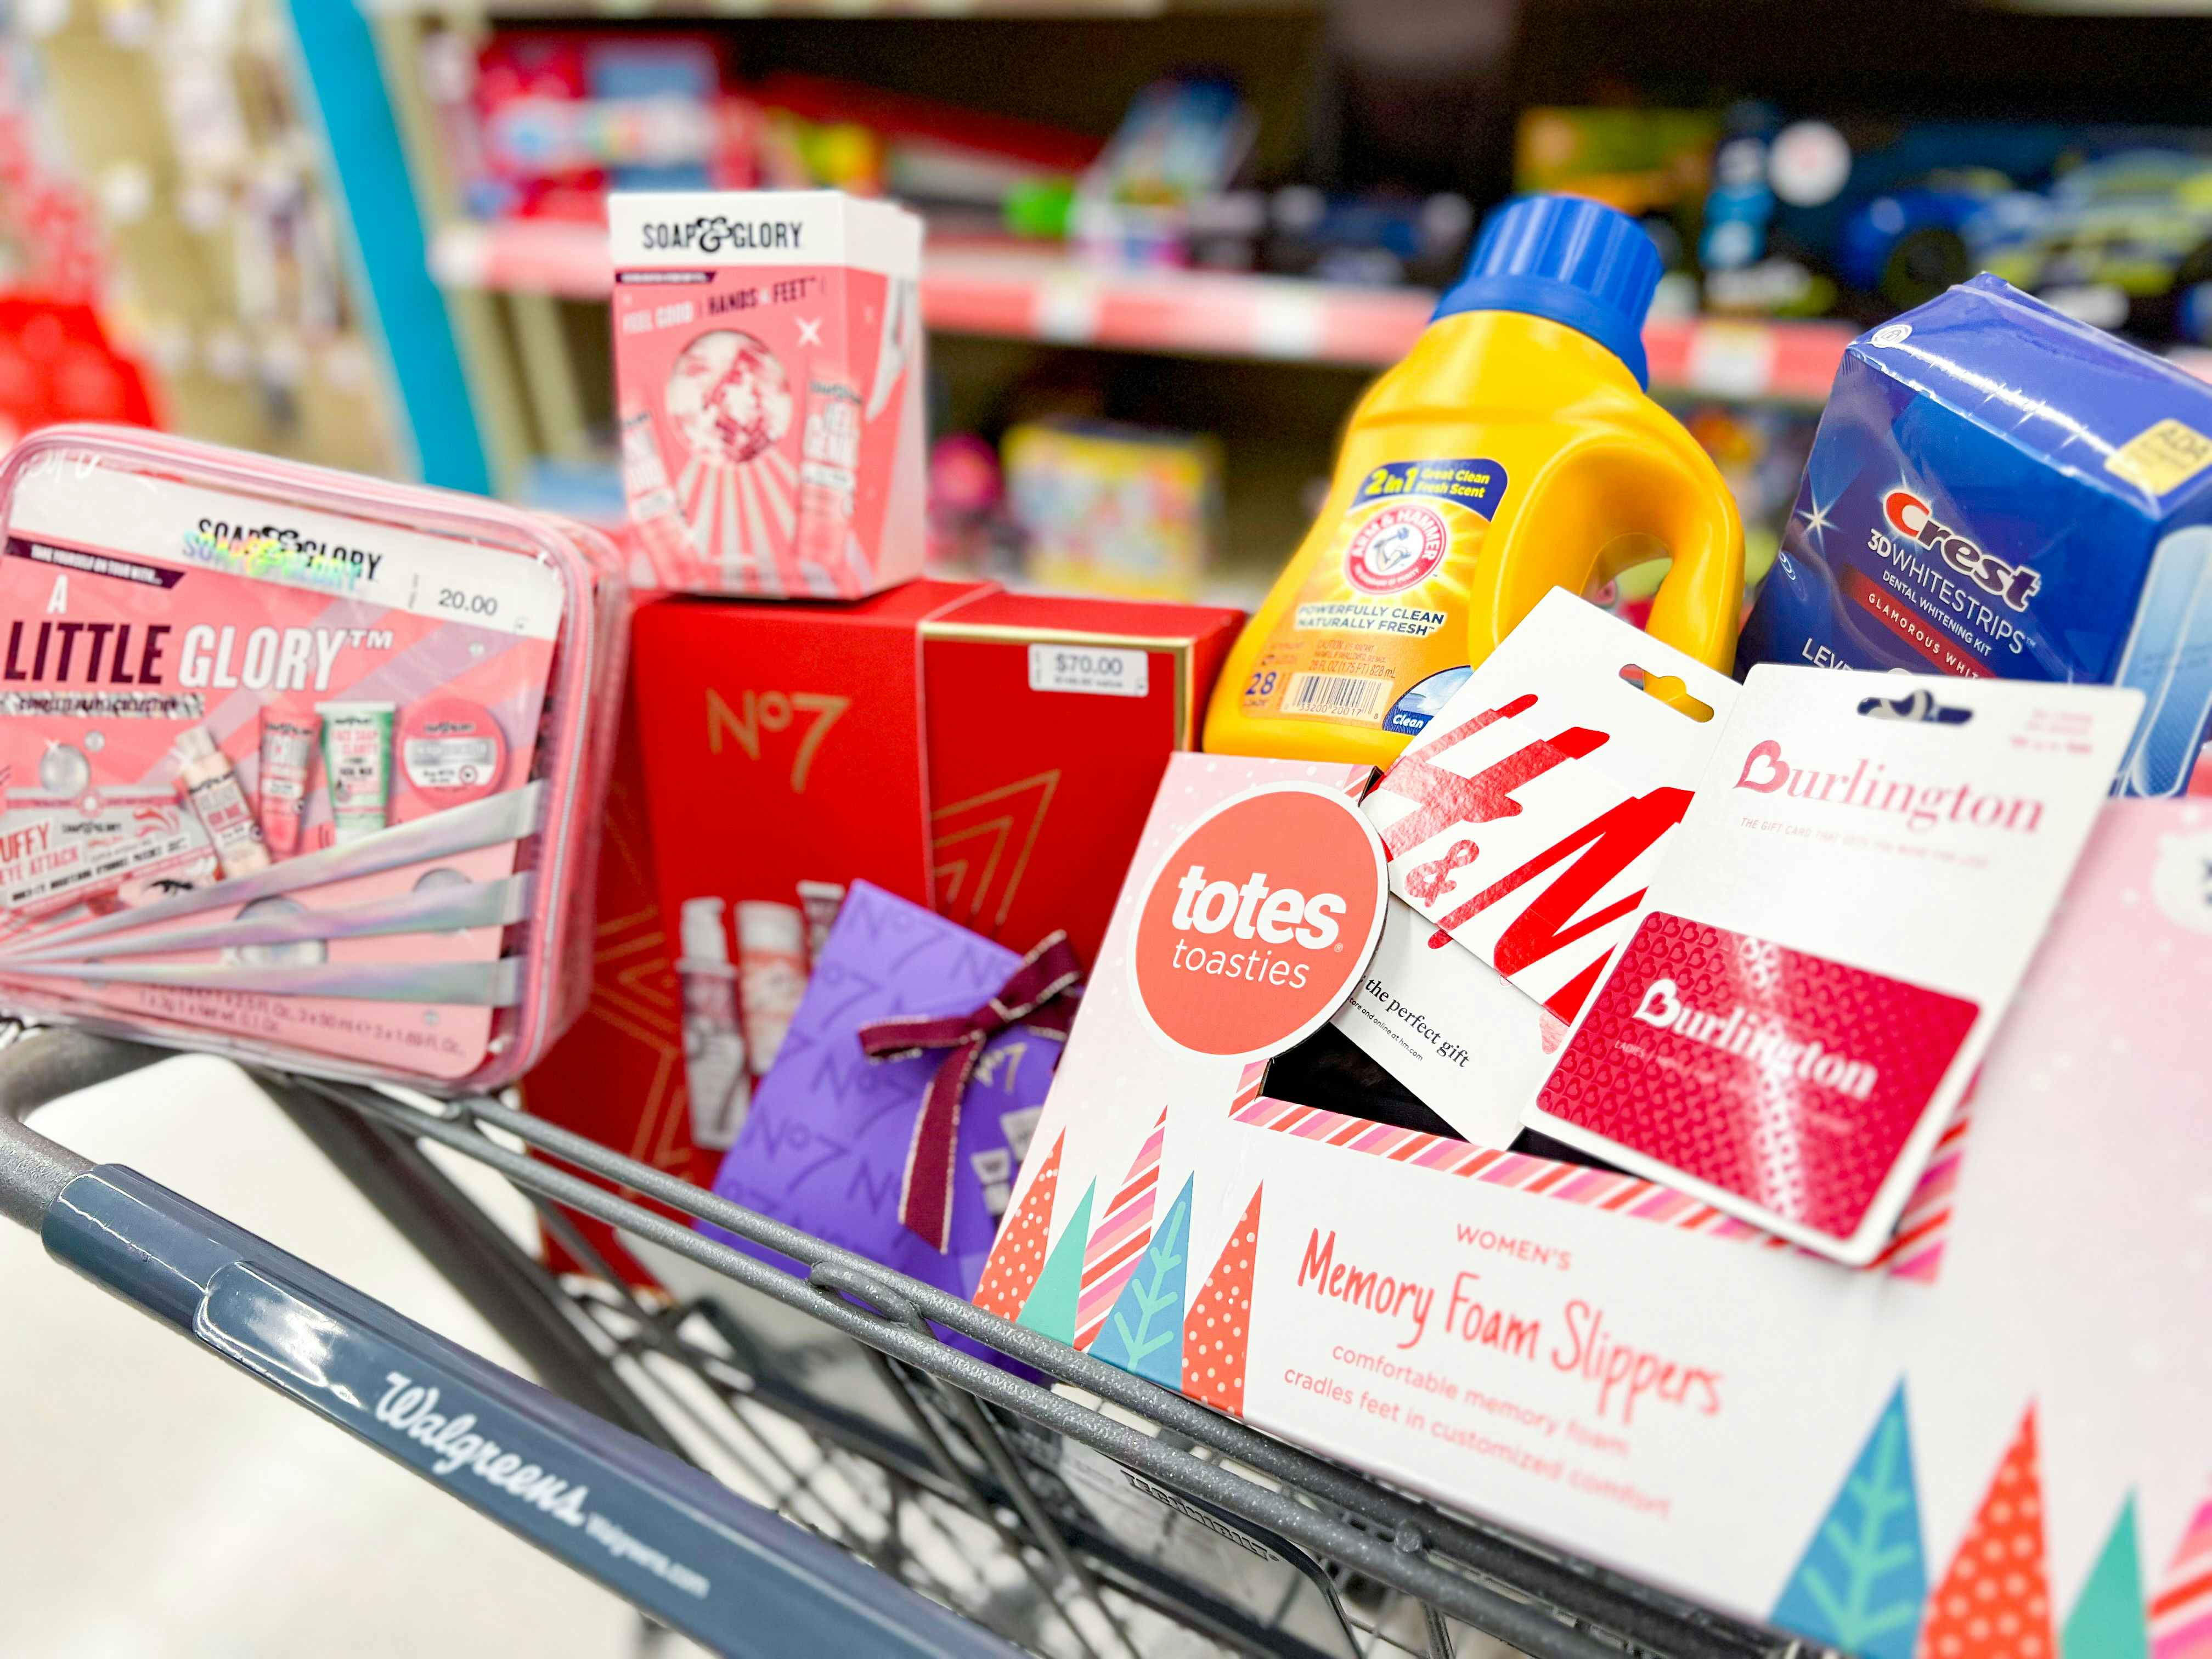 a walgreens cart filled with items